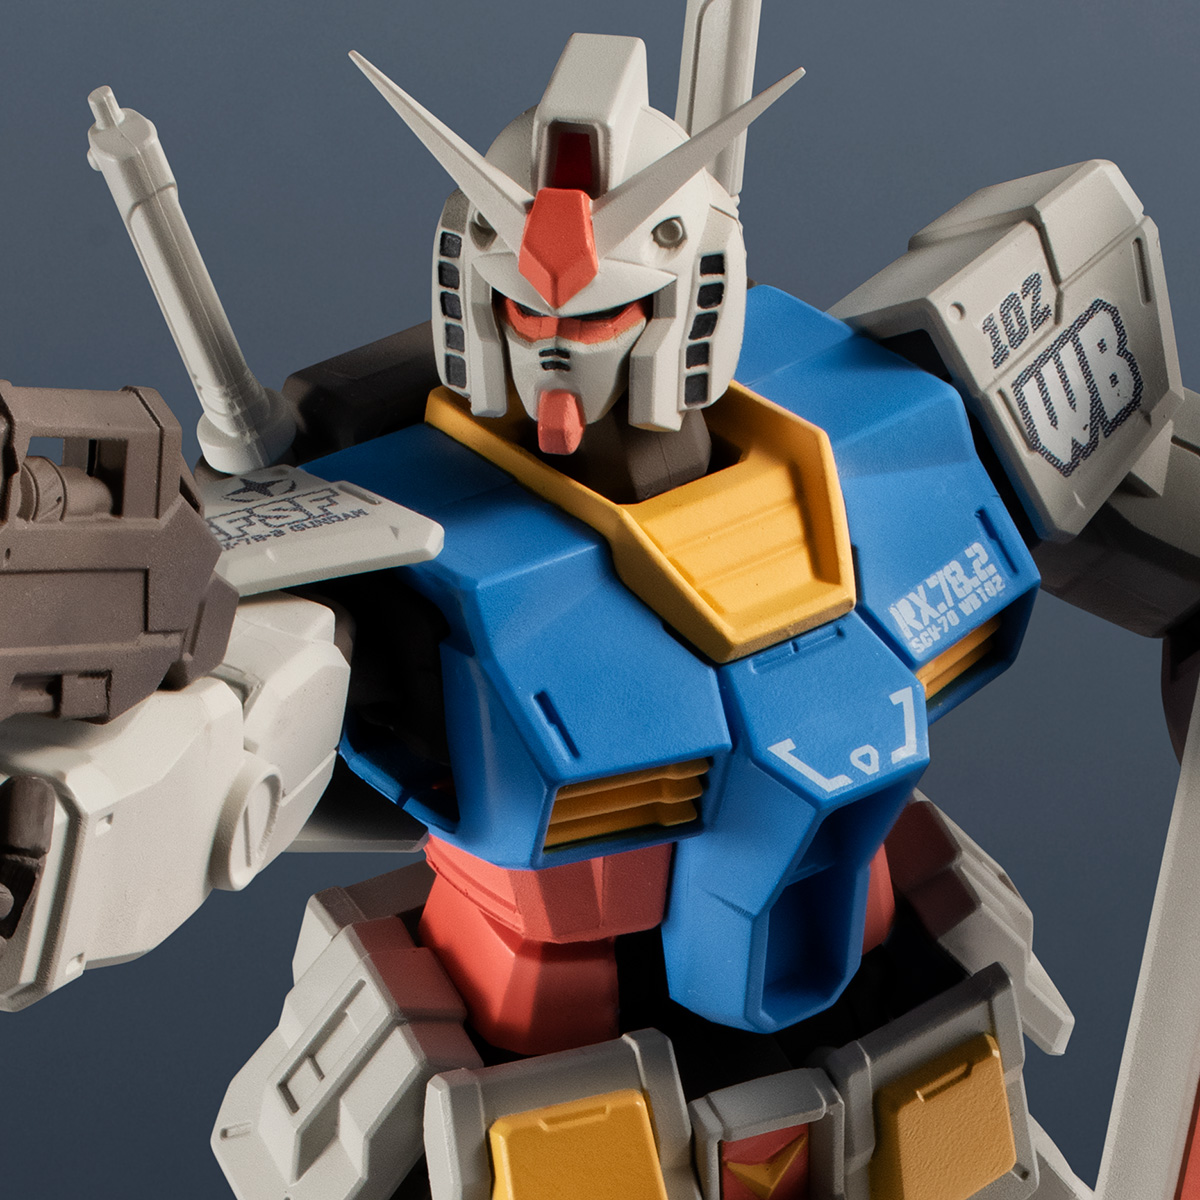 PREMIUM BANDAI USA [Official] Online Store for Action Figures, Model Kits,  Toys and more